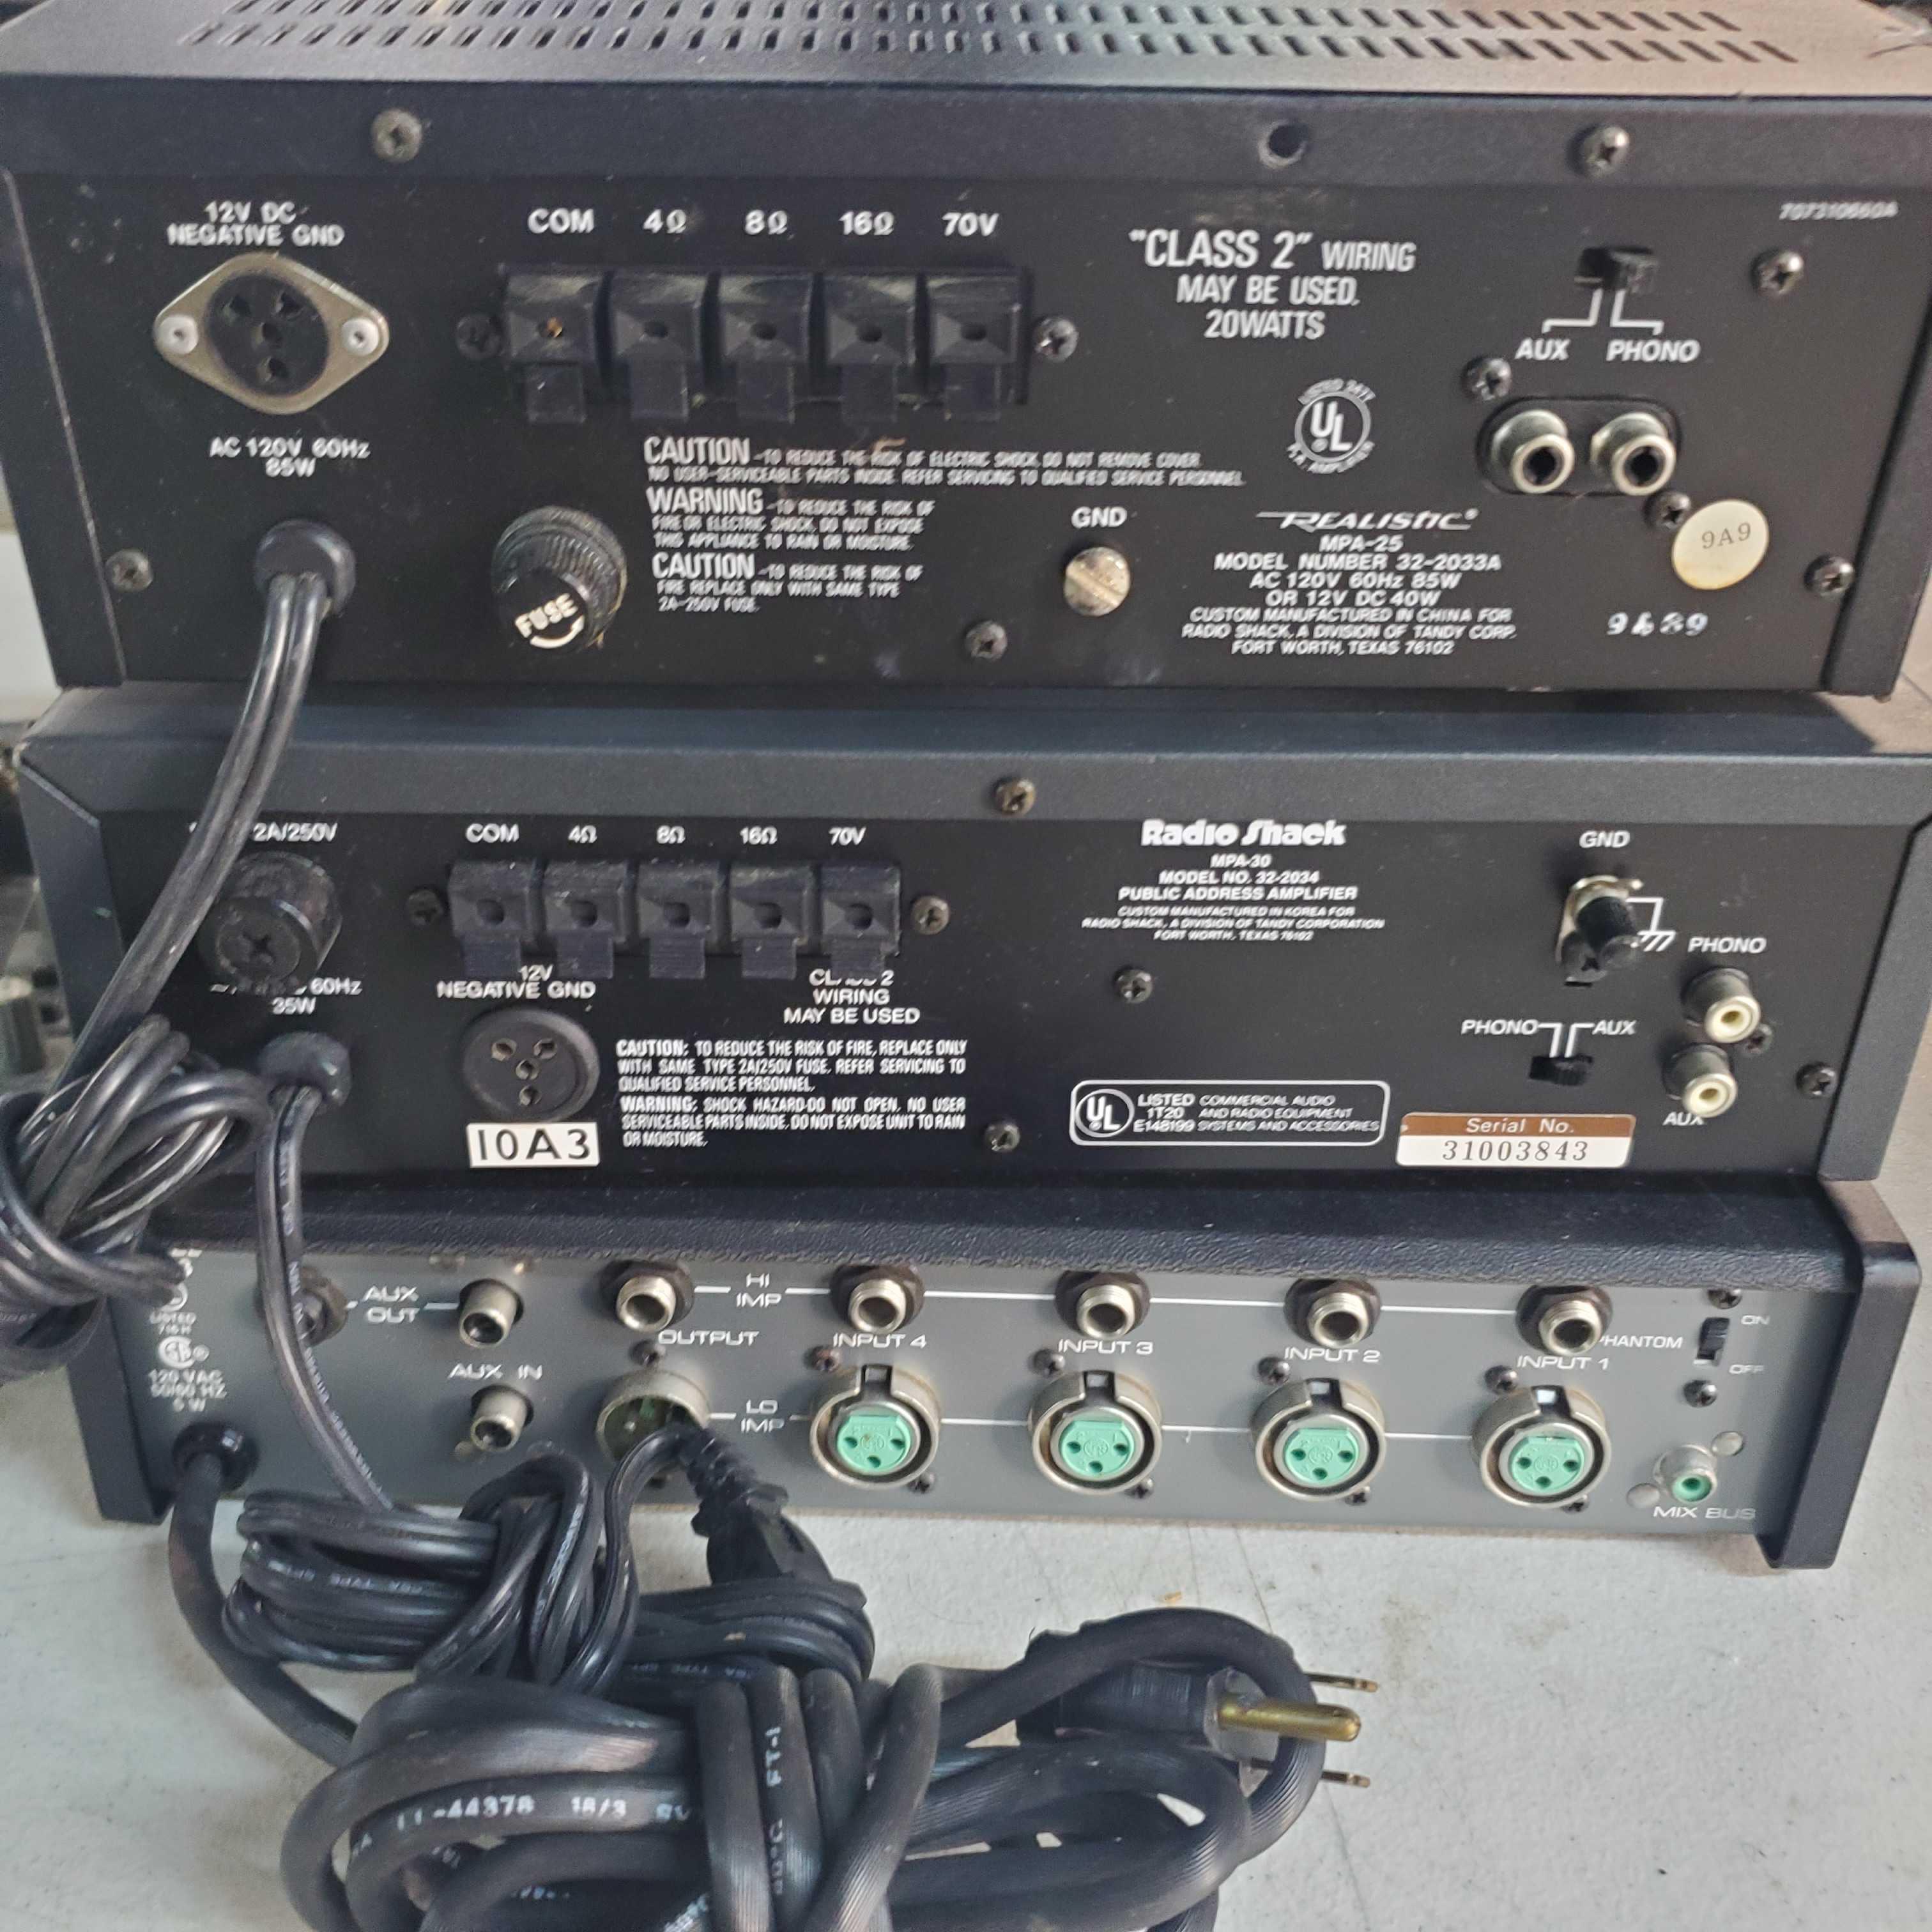 Lot Of 2 Amps & 2 Mixers Realistic, Radio Shack, Behringer And Shure